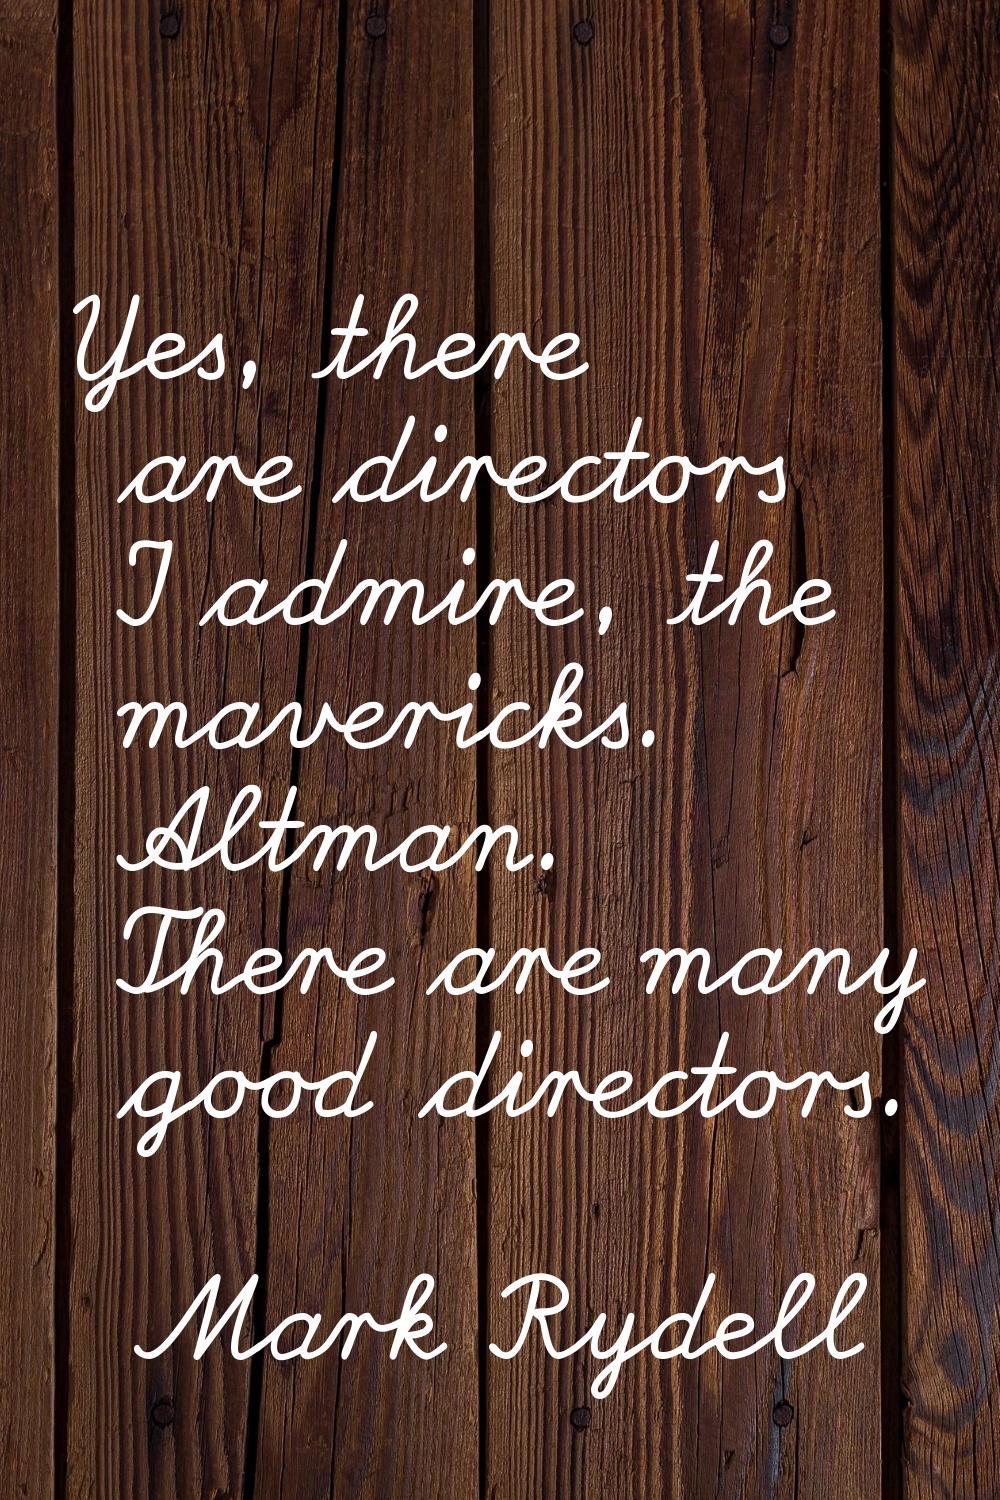 Yes, there are directors I admire, the mavericks. Altman. There are many good directors.